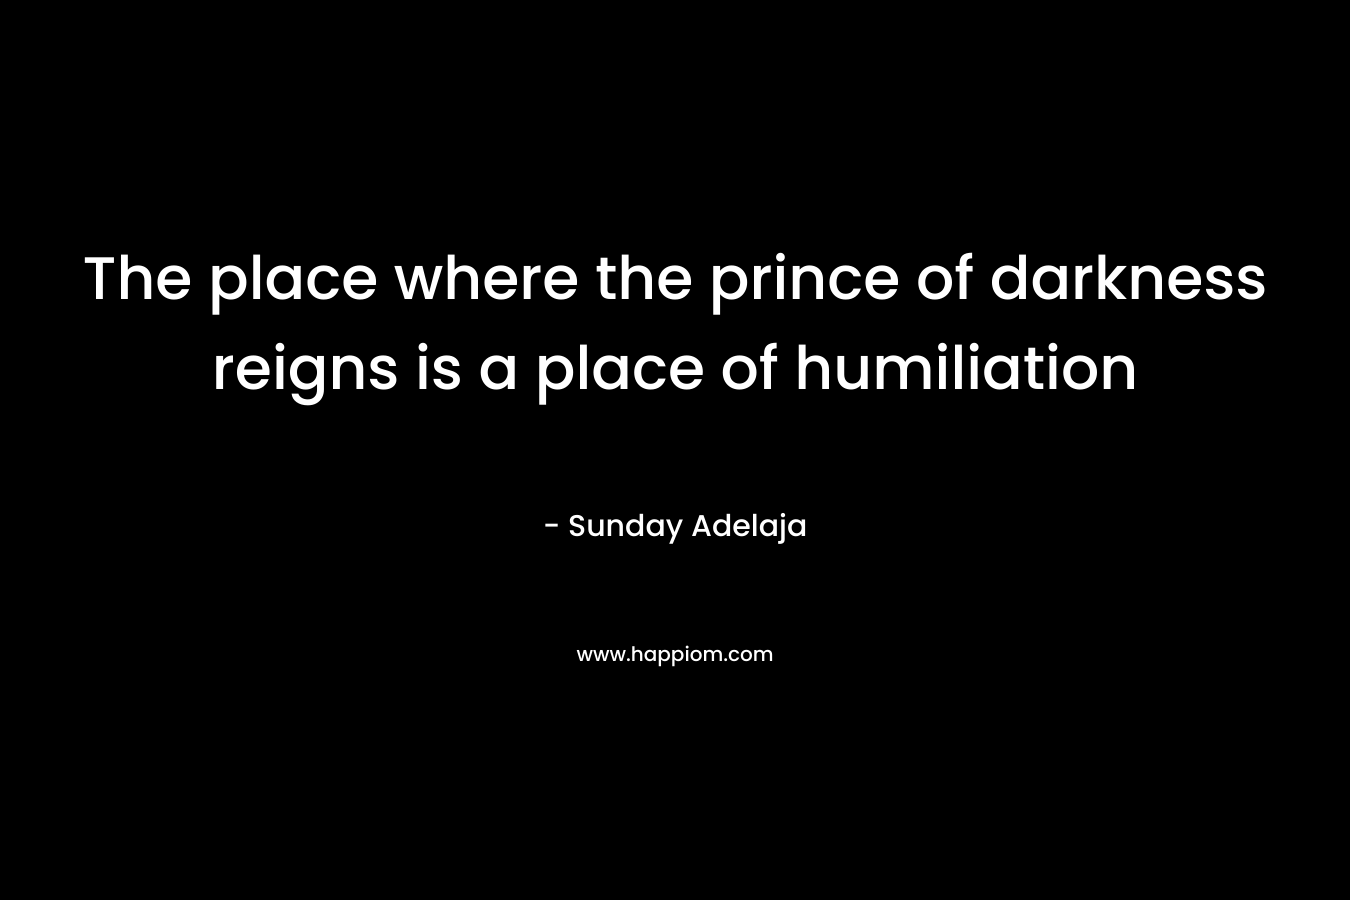 The place where the prince of darkness reigns is a place of humiliation